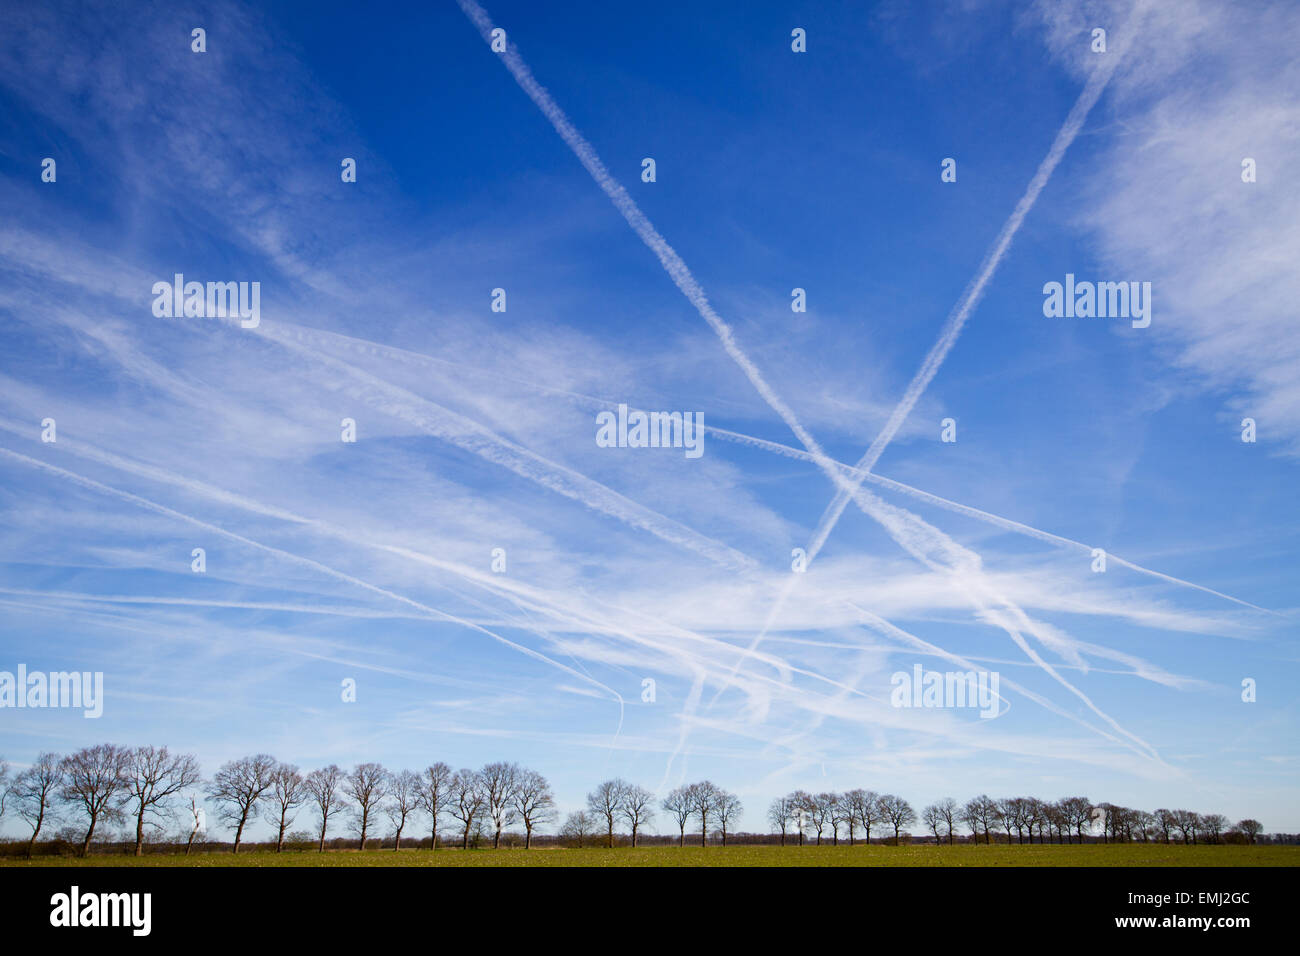 Lots of condensation trails, contrails or vapor trails in a blue sky Stock Photo